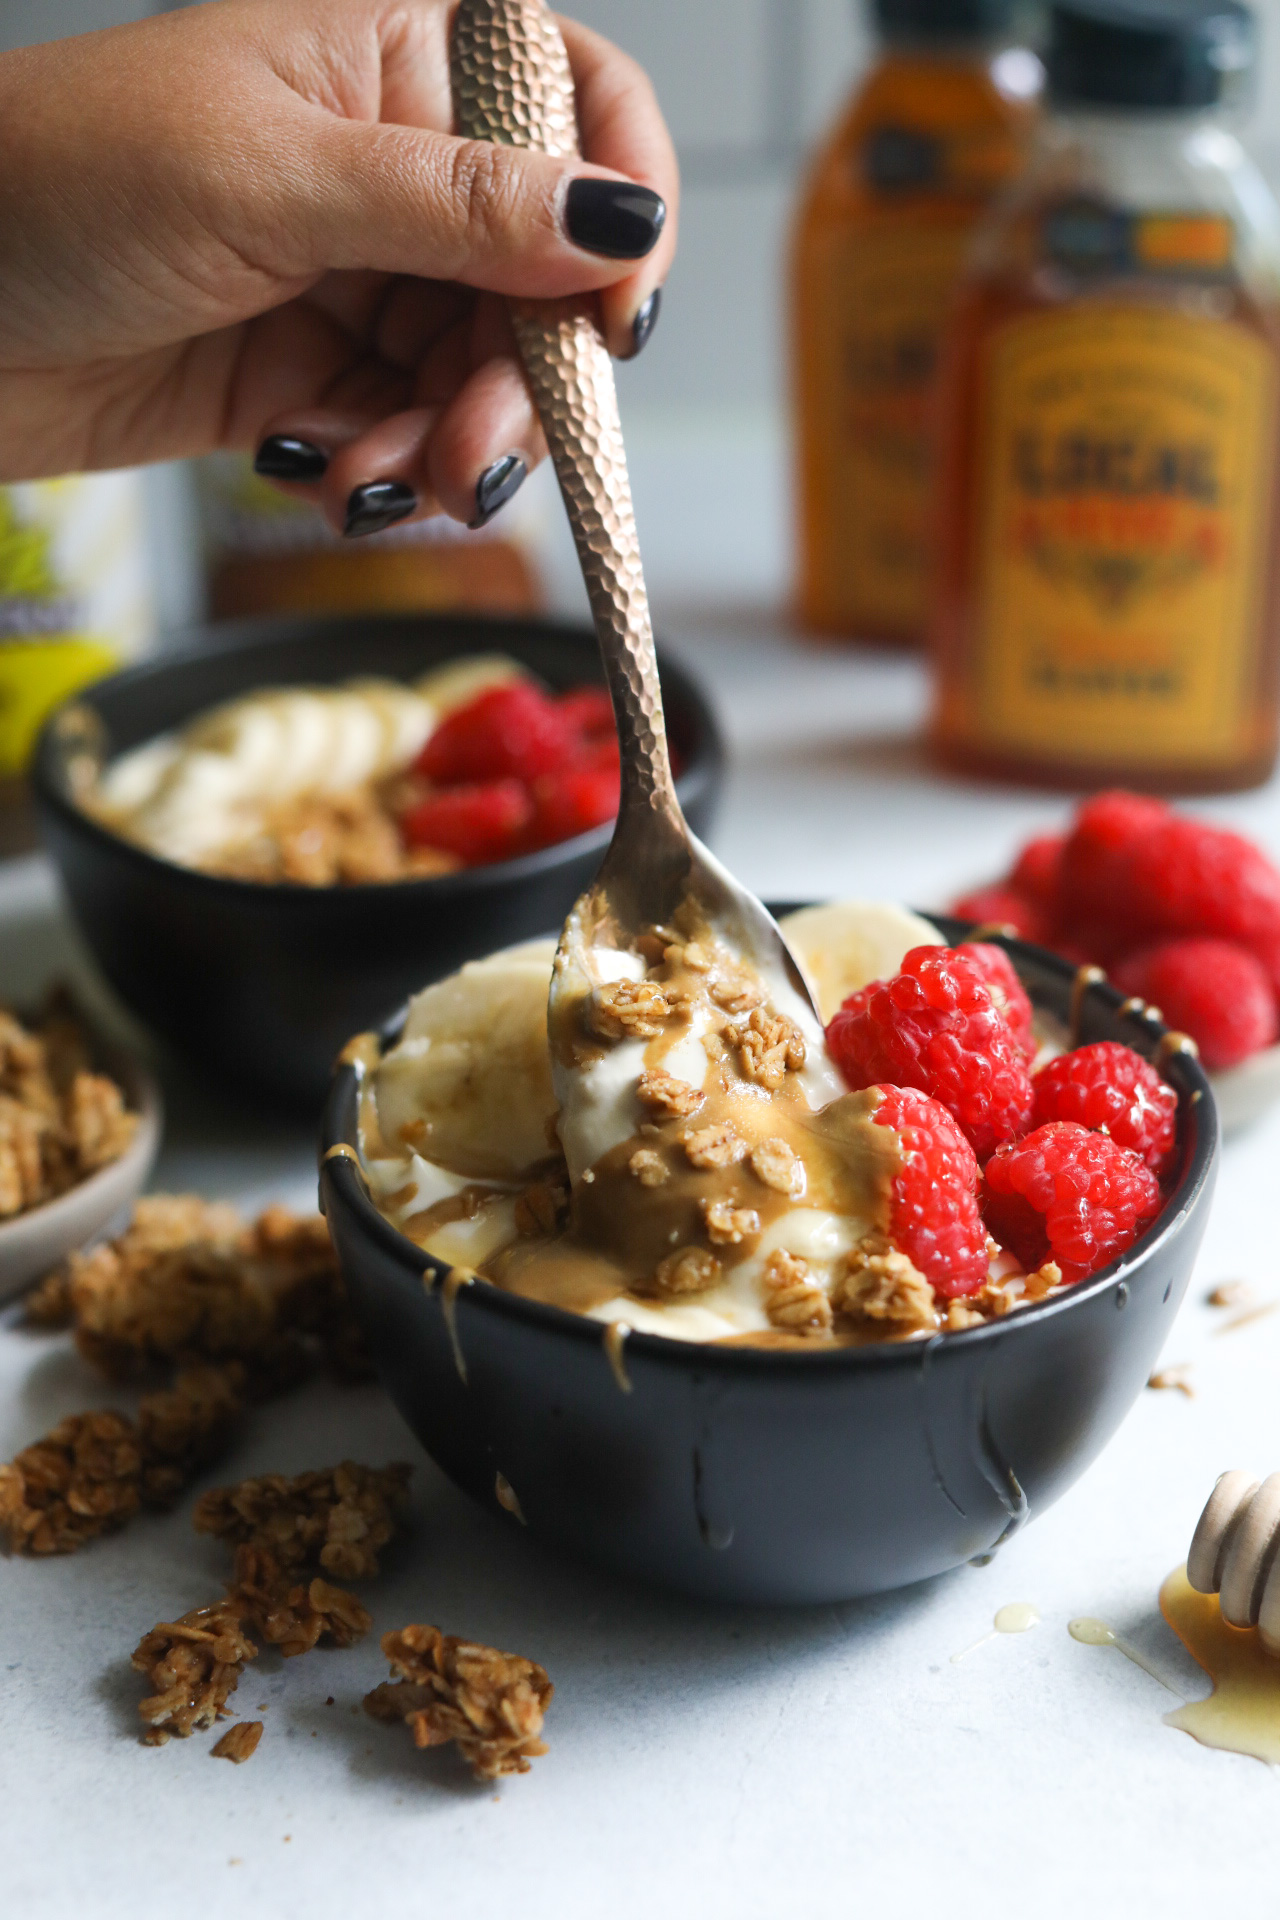 Whipped Greek yogurt bowl dressed with toppings (sunflower butter, sliced bananas, raspberries and granola) with a bronze decorative spoon with a hand scooping yogurt content out.